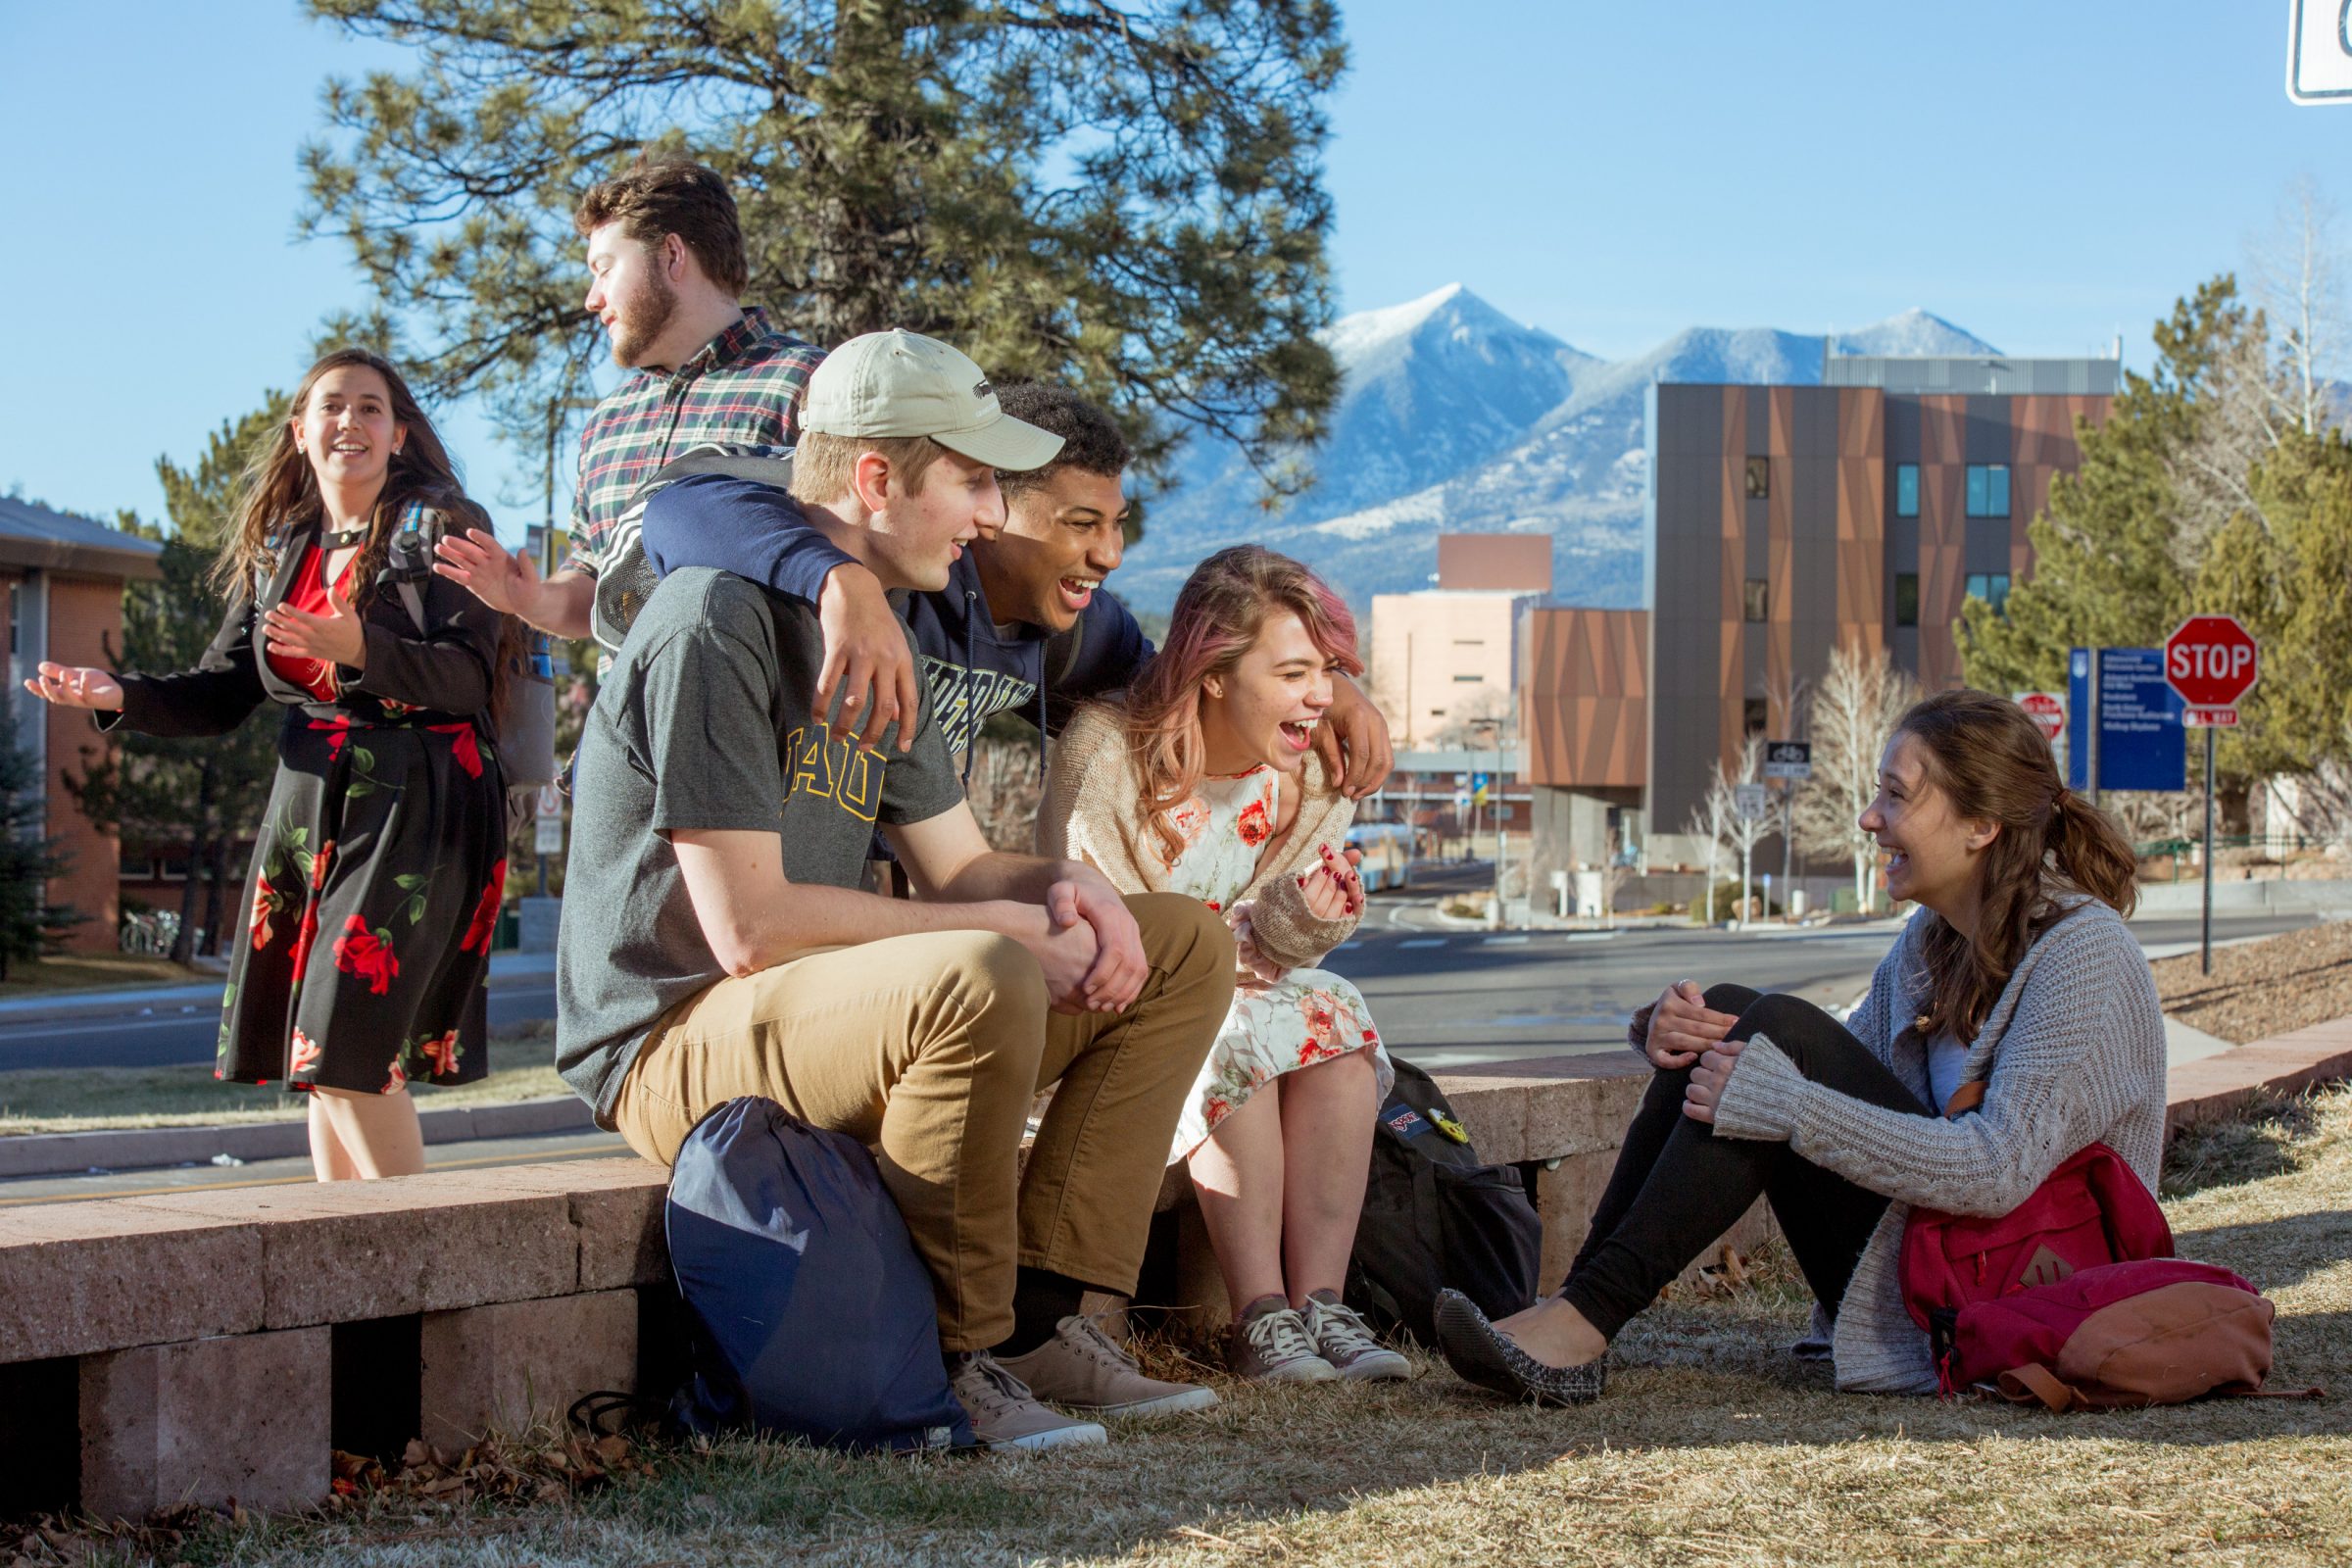 A group of friends hanging out together outside with campus buildings and mountains in the background.